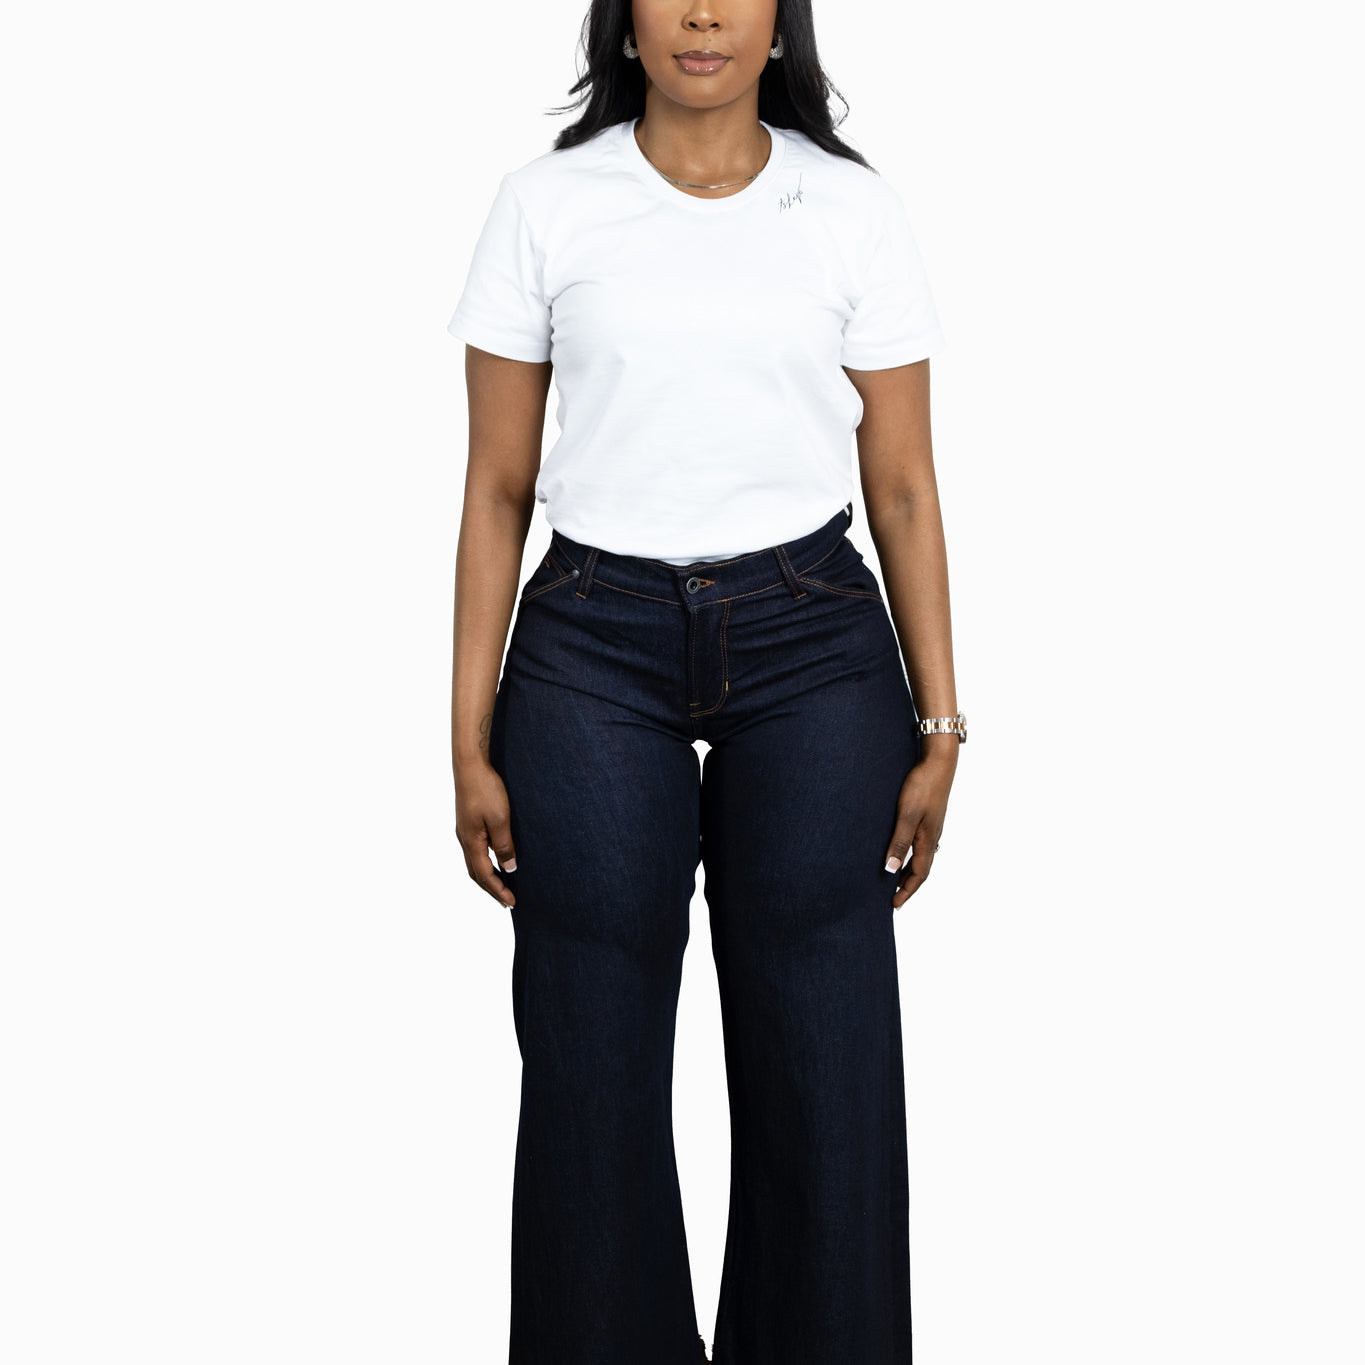 A FRONT IMAGE OF A MODEL WEARING THE RAW TSHEPO PAKISHA JEANS